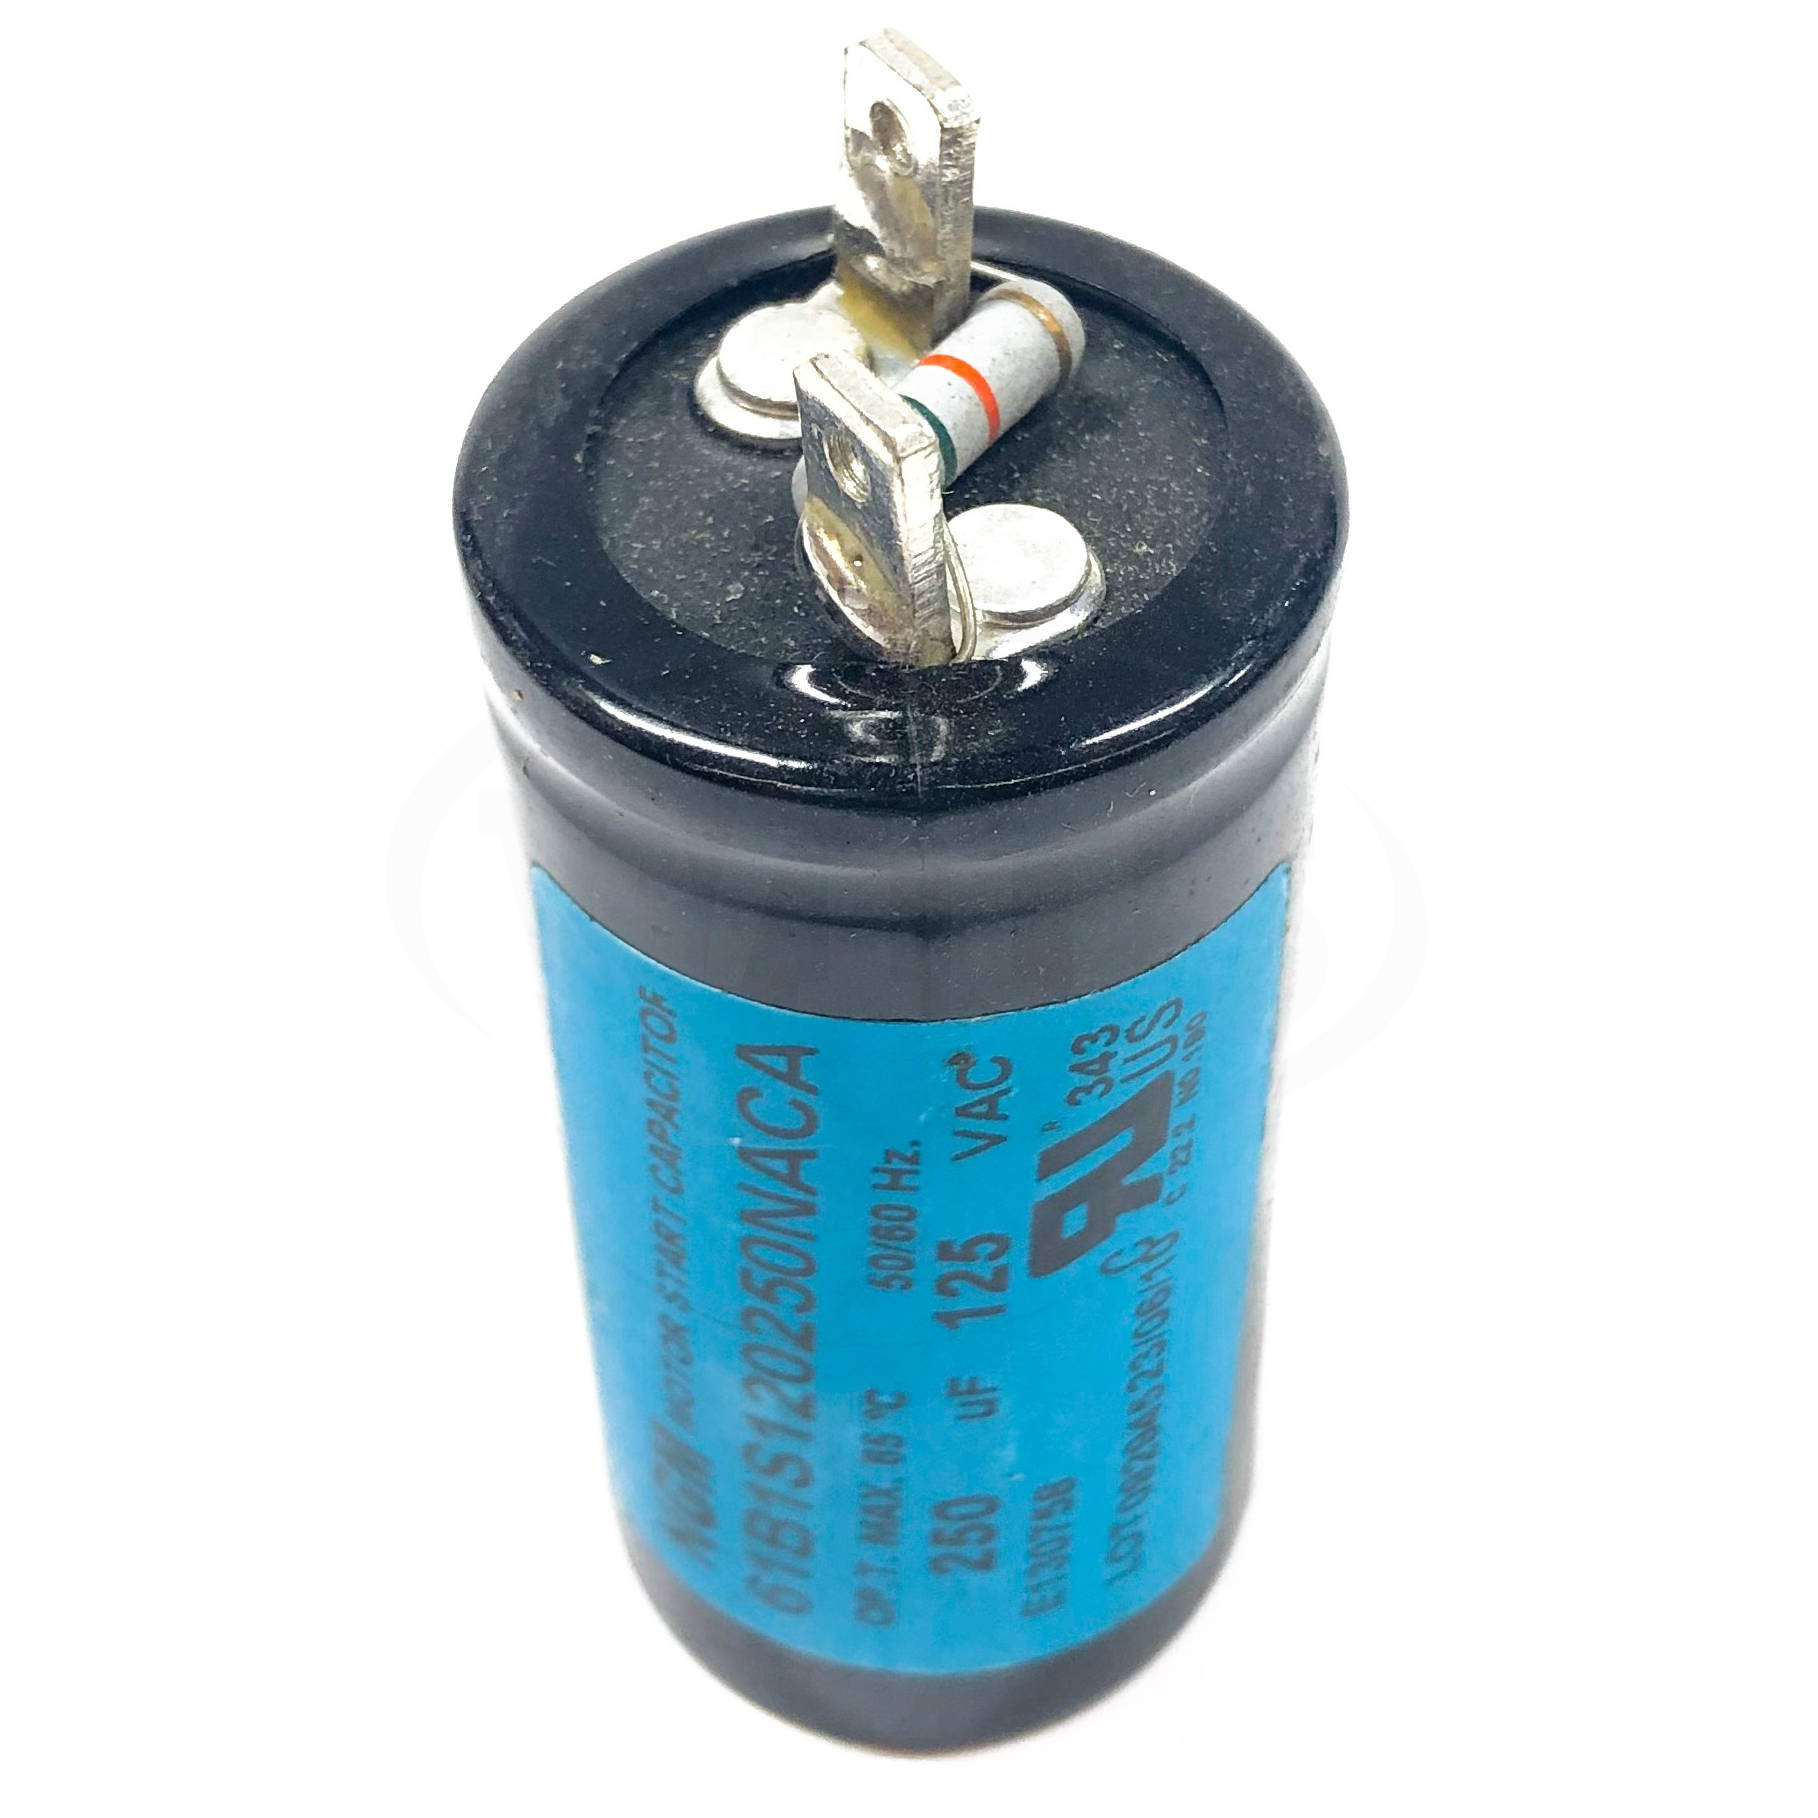 Start Capacitor 43-56 MFD uf 110-125 VAC Round Electric Motor • Made in USA 